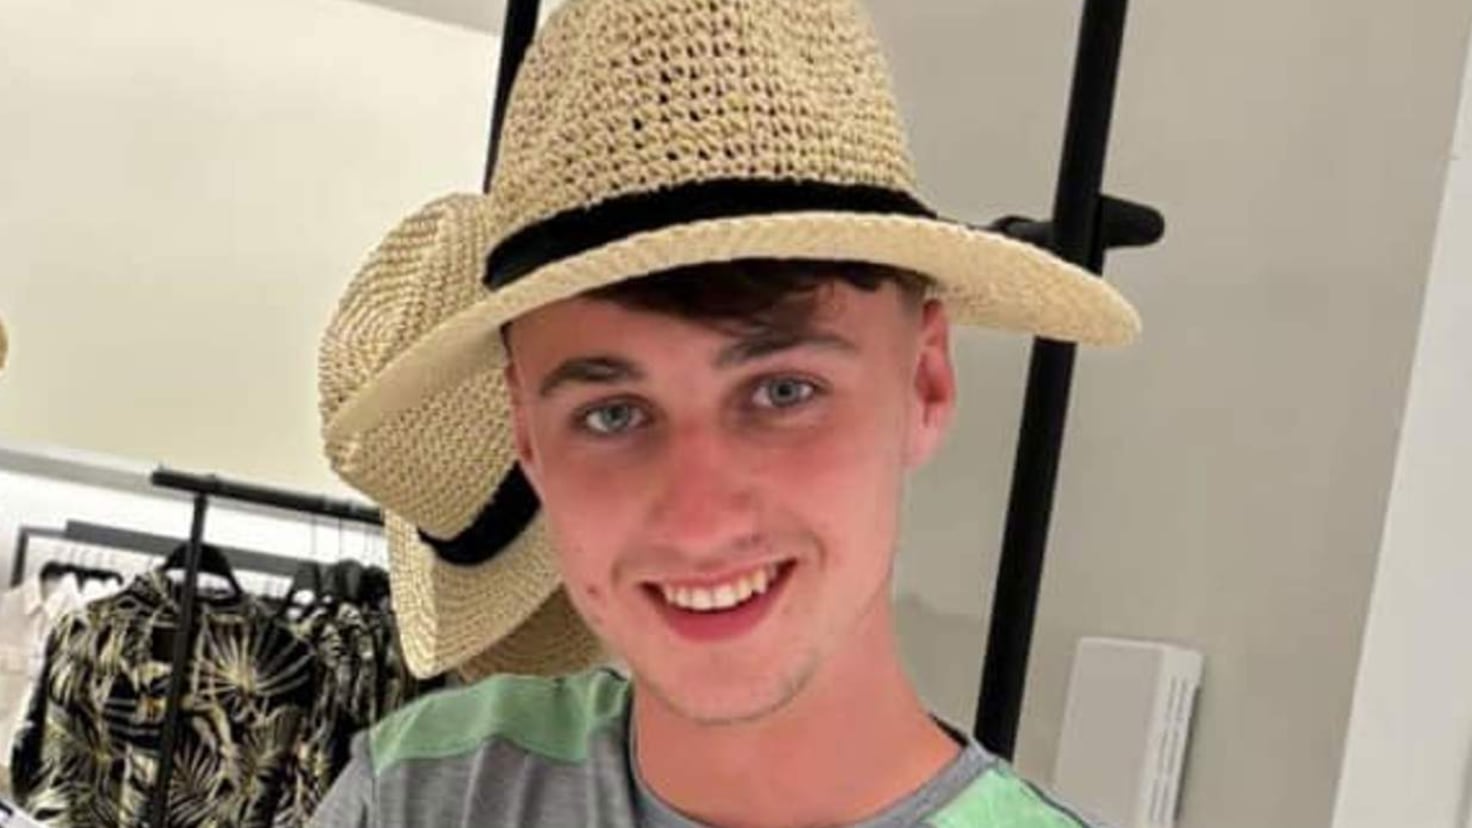 A body was found in the area where they were looking for Jay Slater, the Briton who disappeared in Tenerife